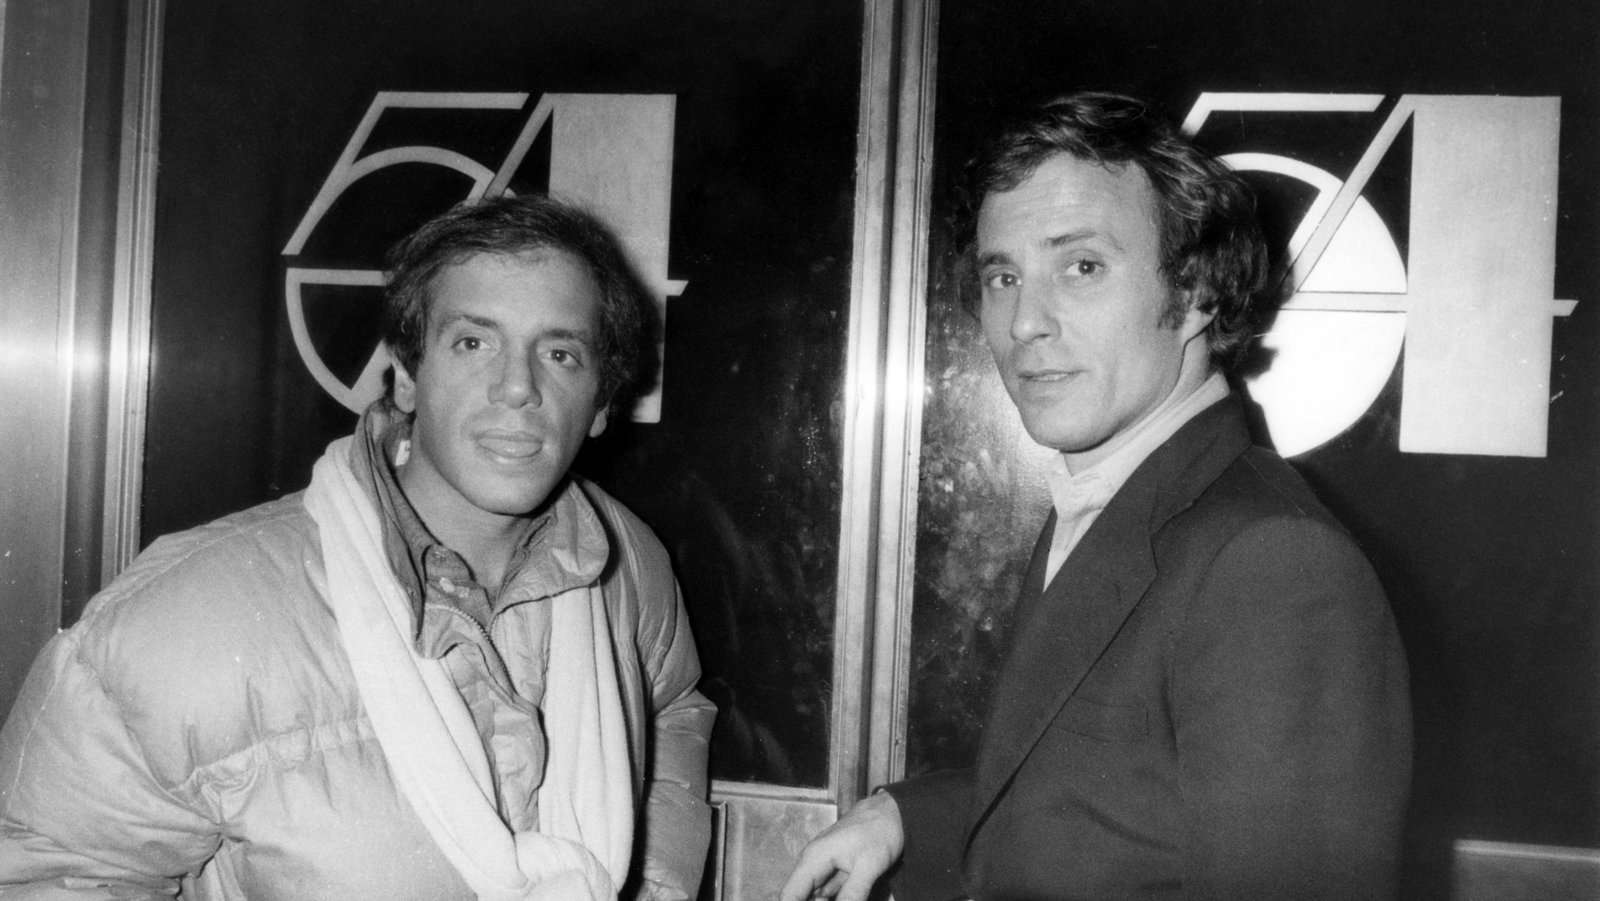 Steve Rubell and Ian Schrager in front of Studio 54.